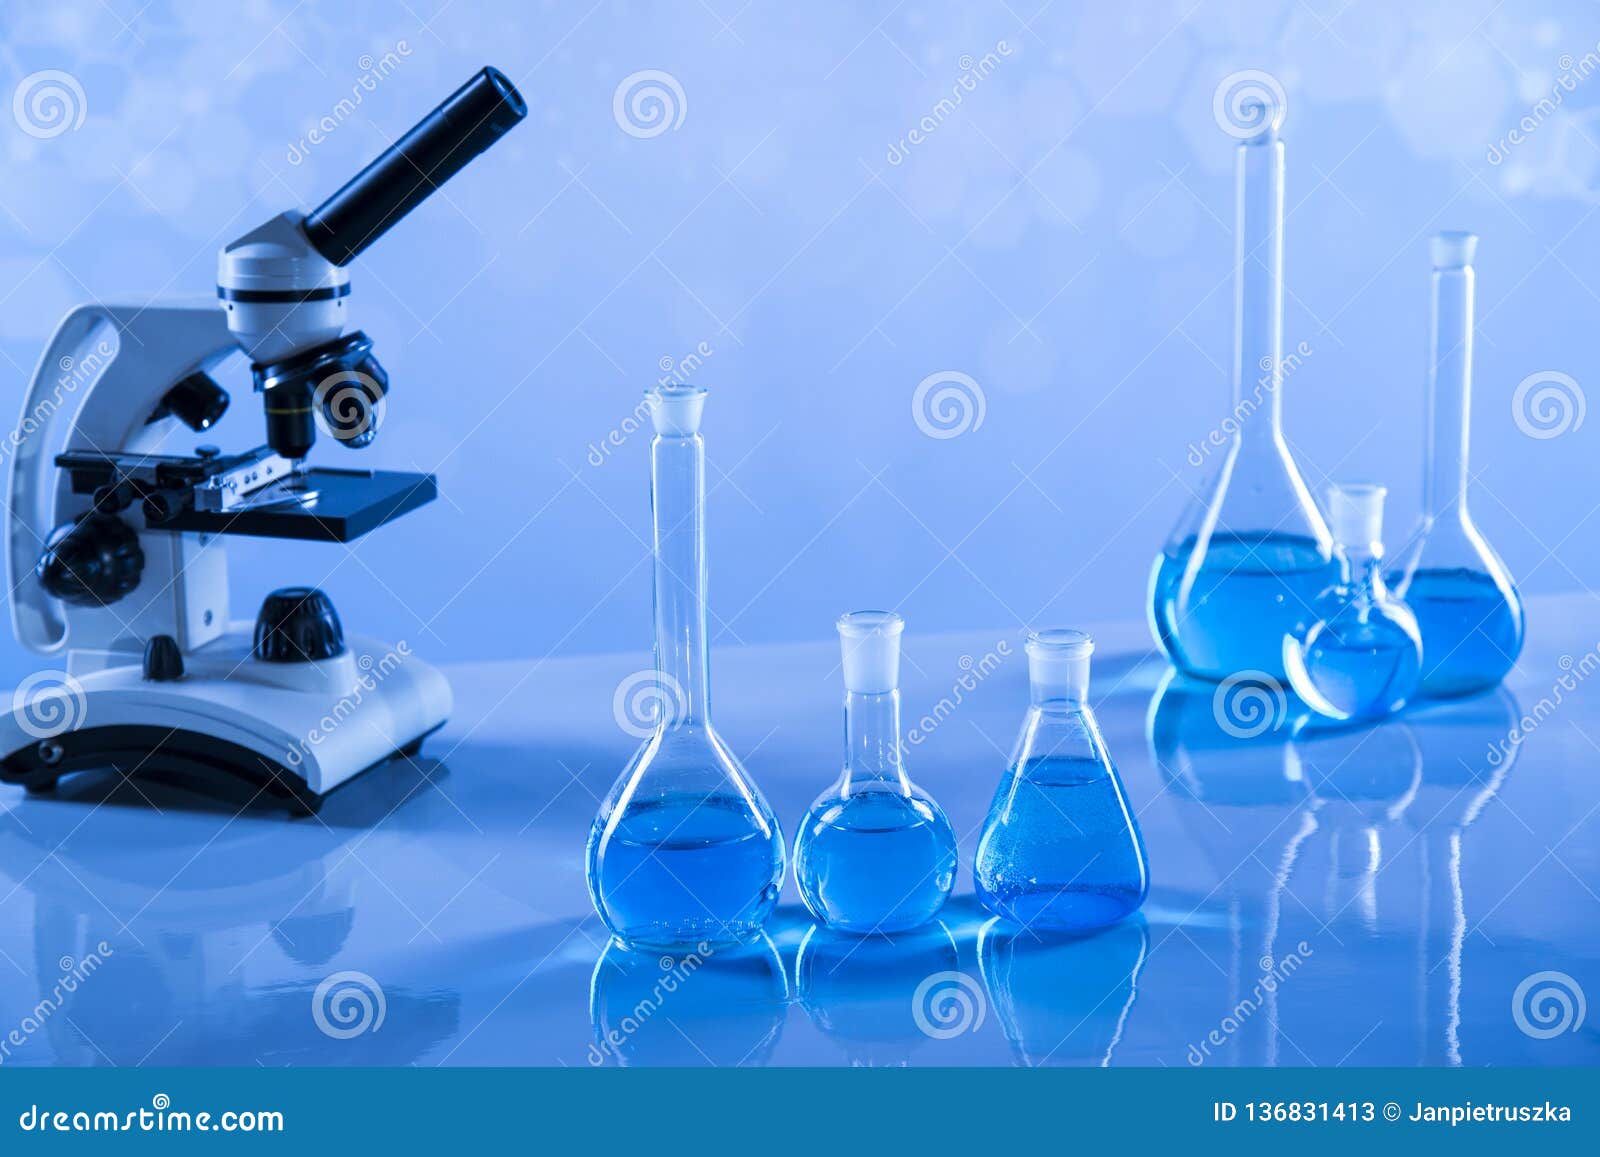 Laboratory Equipment, Lots of Glass Filled Stock Image - Image of ...